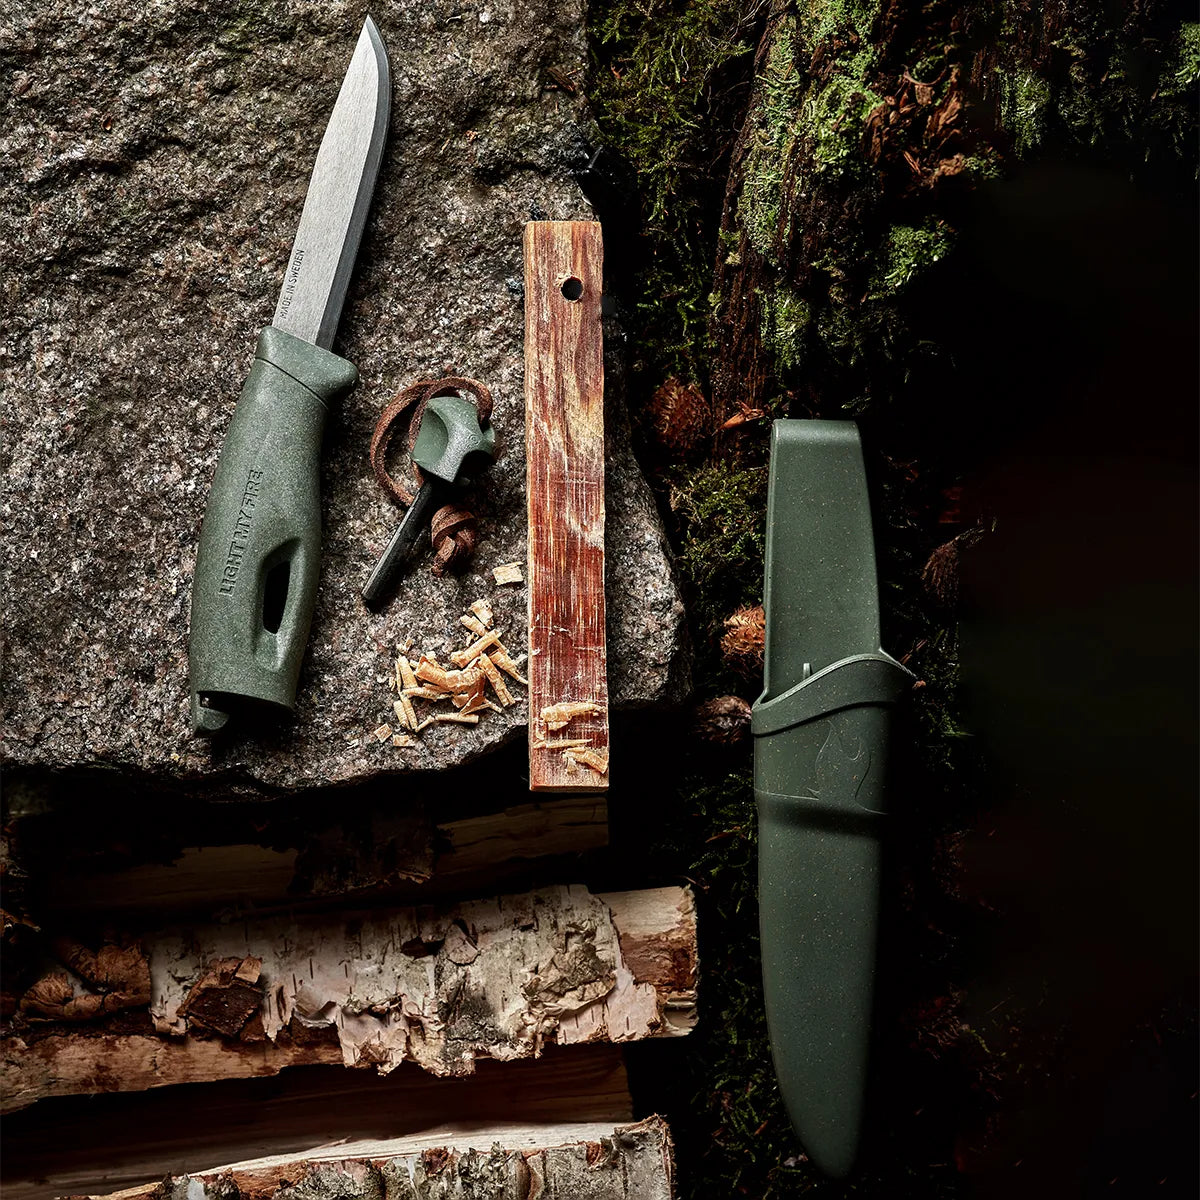 Green knife and sheath on a rock next to wood.